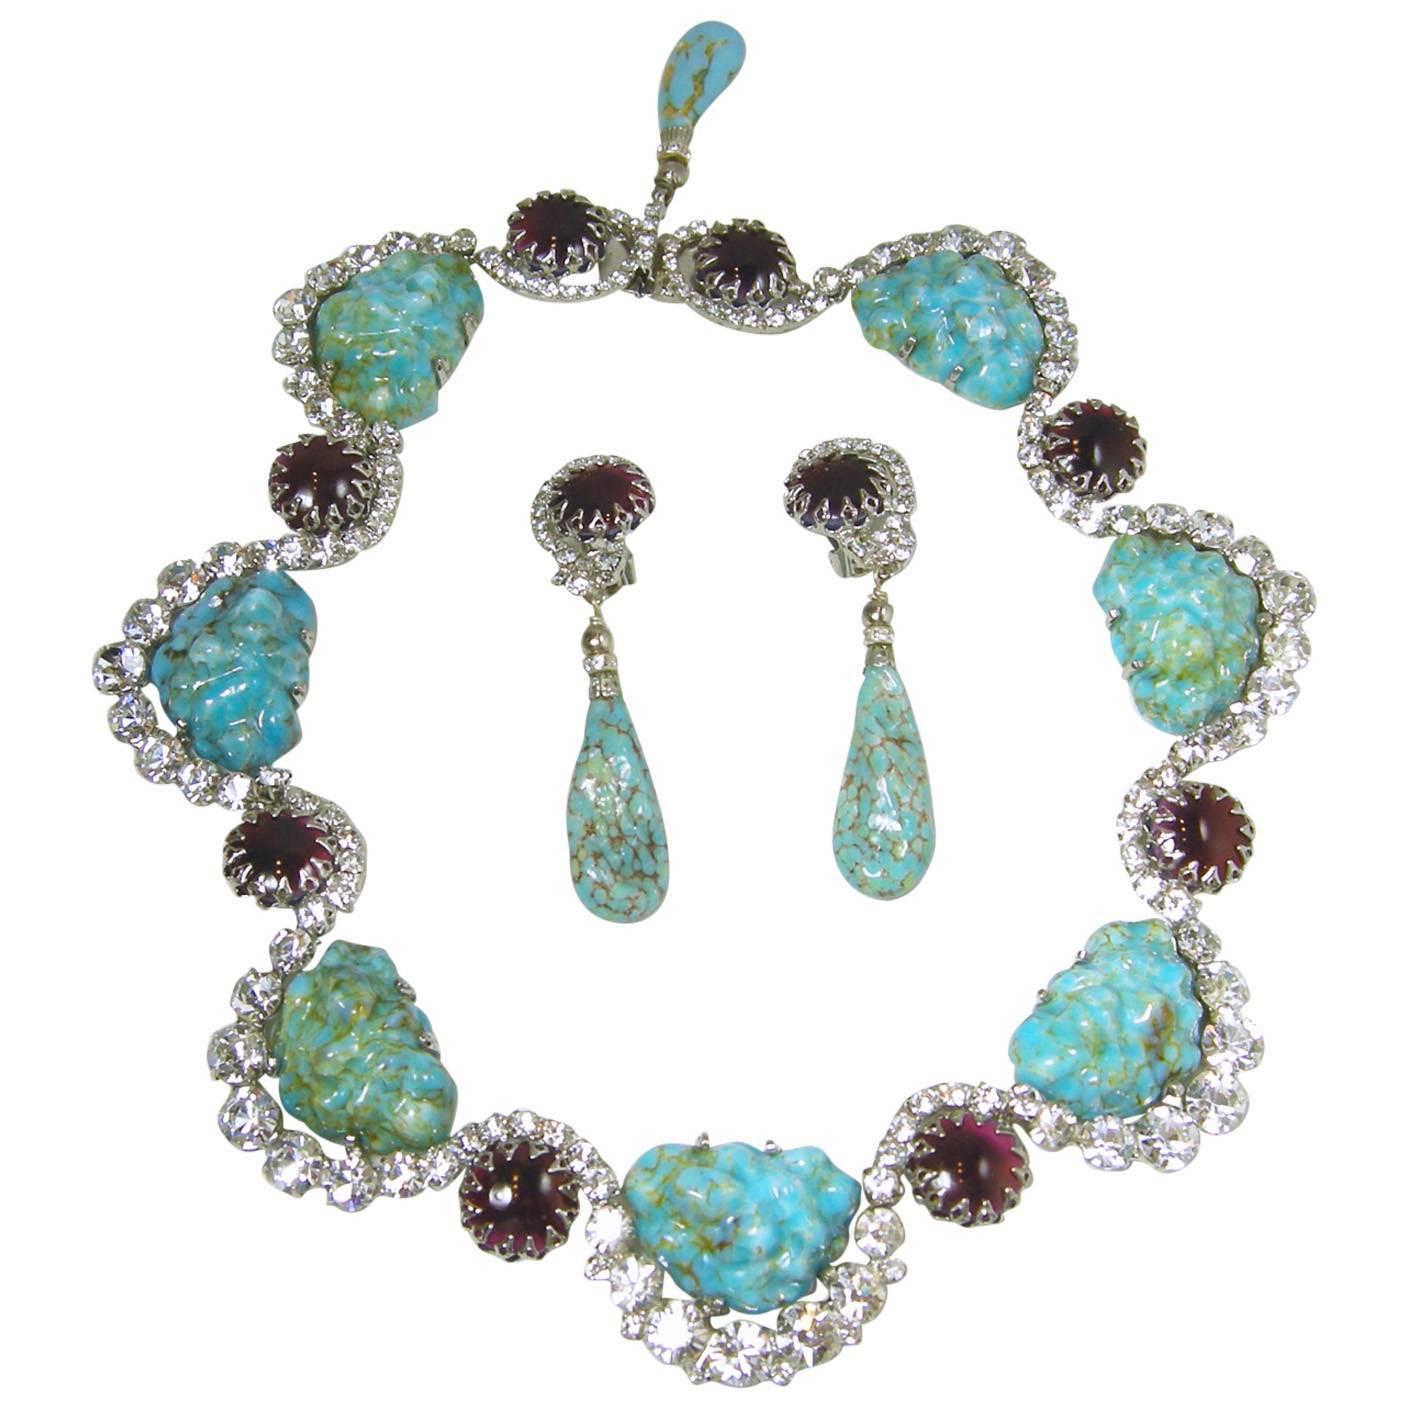 Robert Sorrell “One Of A Kind” Faux Turquoise Scallop Necklace Set